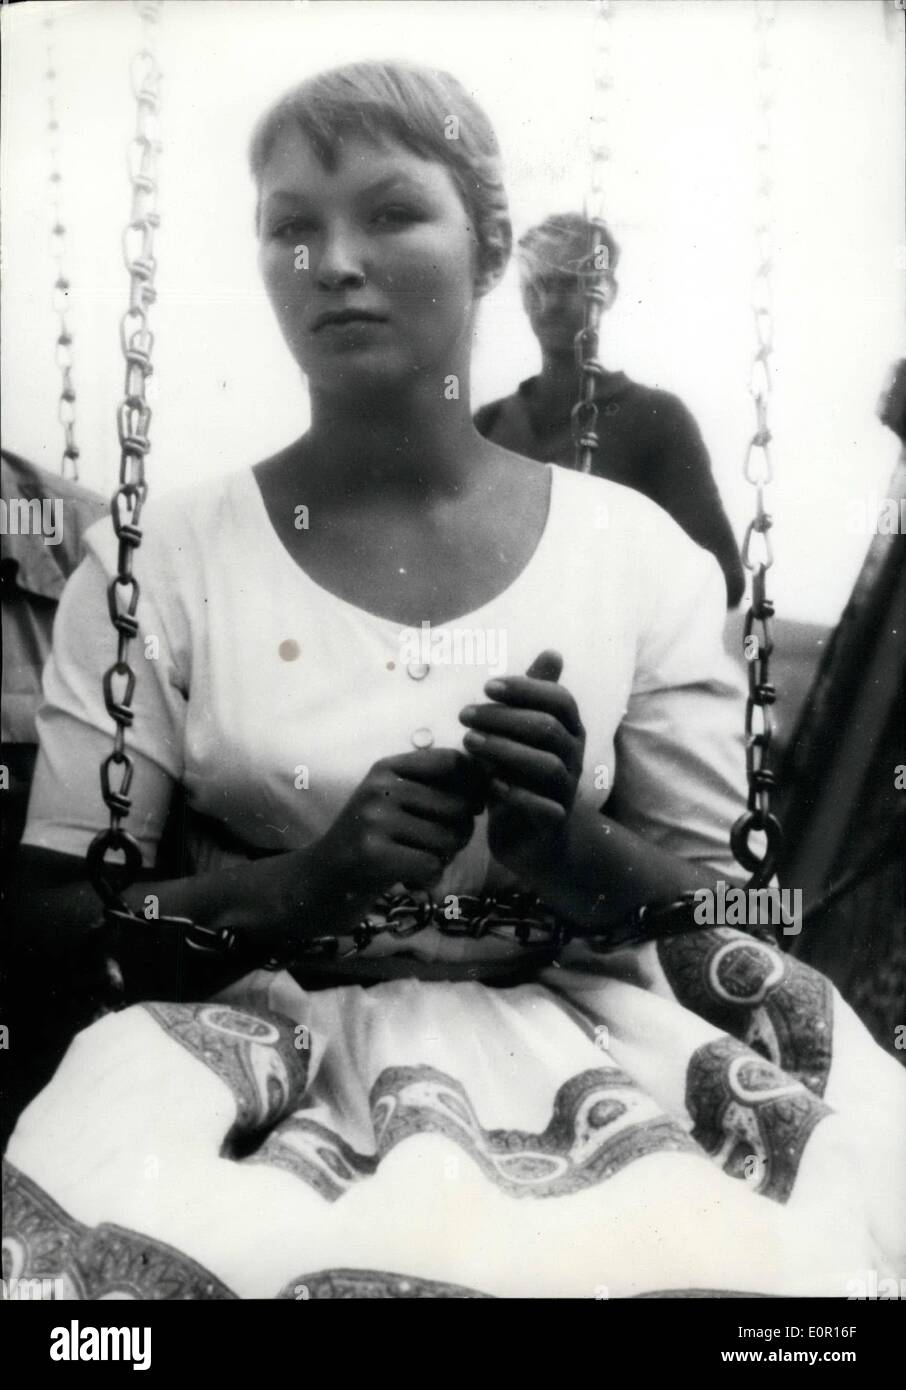 Sep. 09, 1957 - Marine Lady chained up? : The reality is not so Grim. The young Franco-Russian Actress who is co-starring with her husband Robert Hossein in the first Franco-czechoslovakian production is seen taking a joy ride on a merry-go-round in a scene made in Eastern Czechoslovakia. Stock Photo